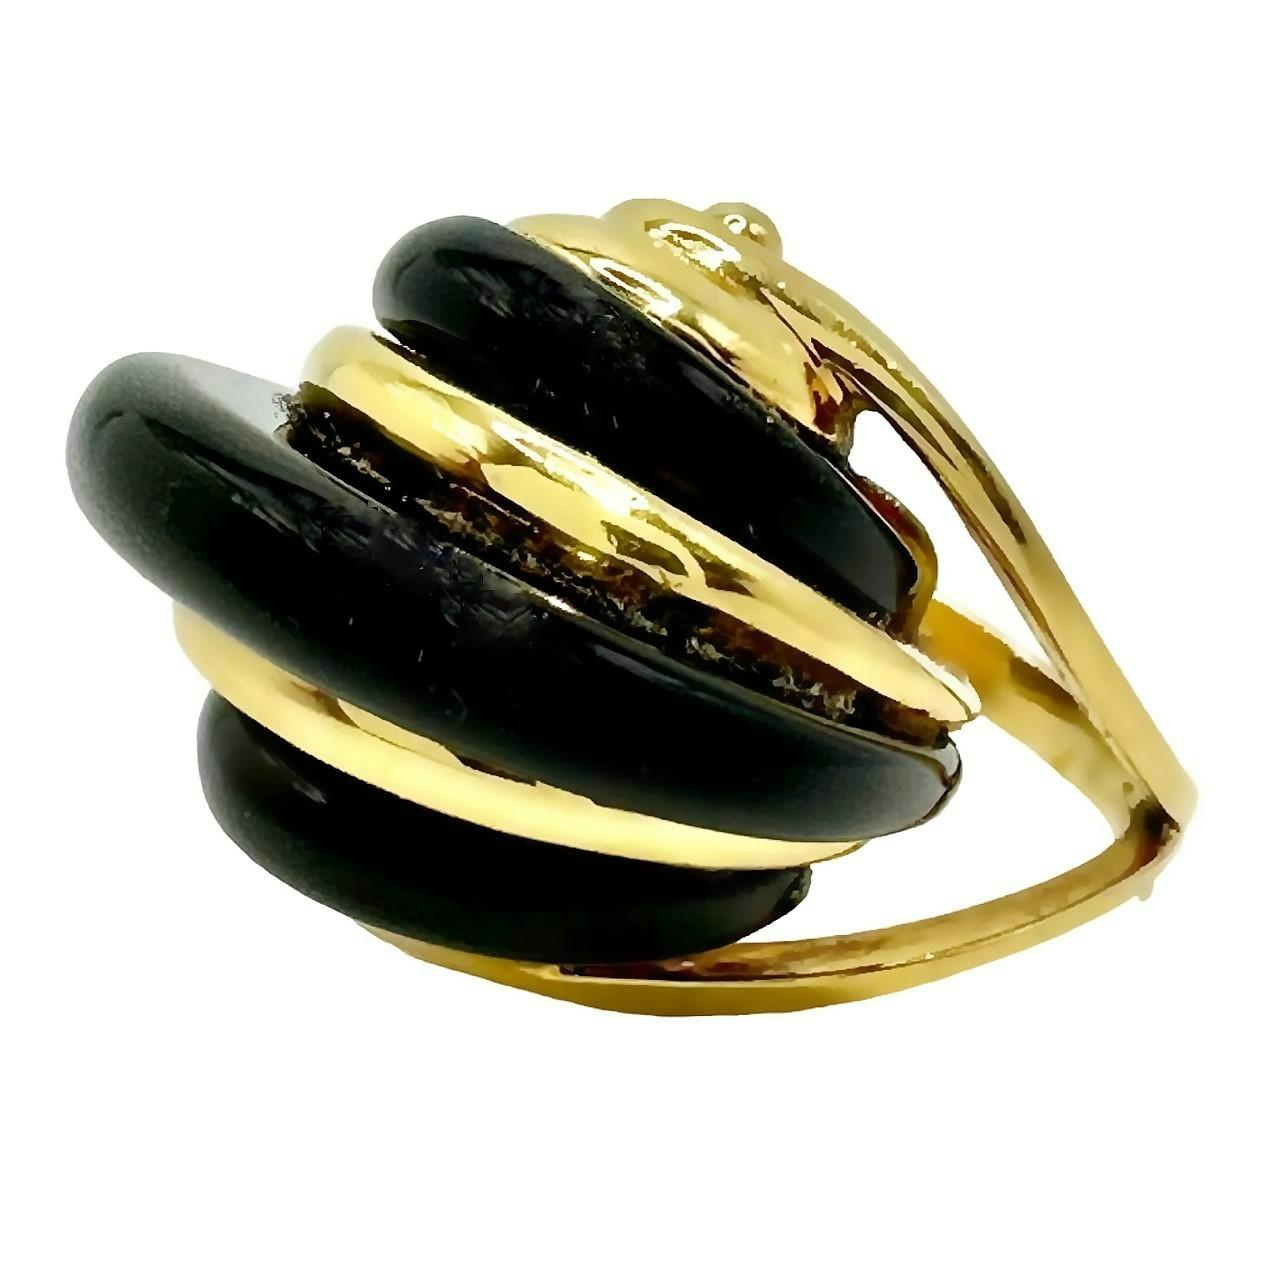 Cabochon 18k Yellow Gold and Onyx Vintage American Modernist Ring